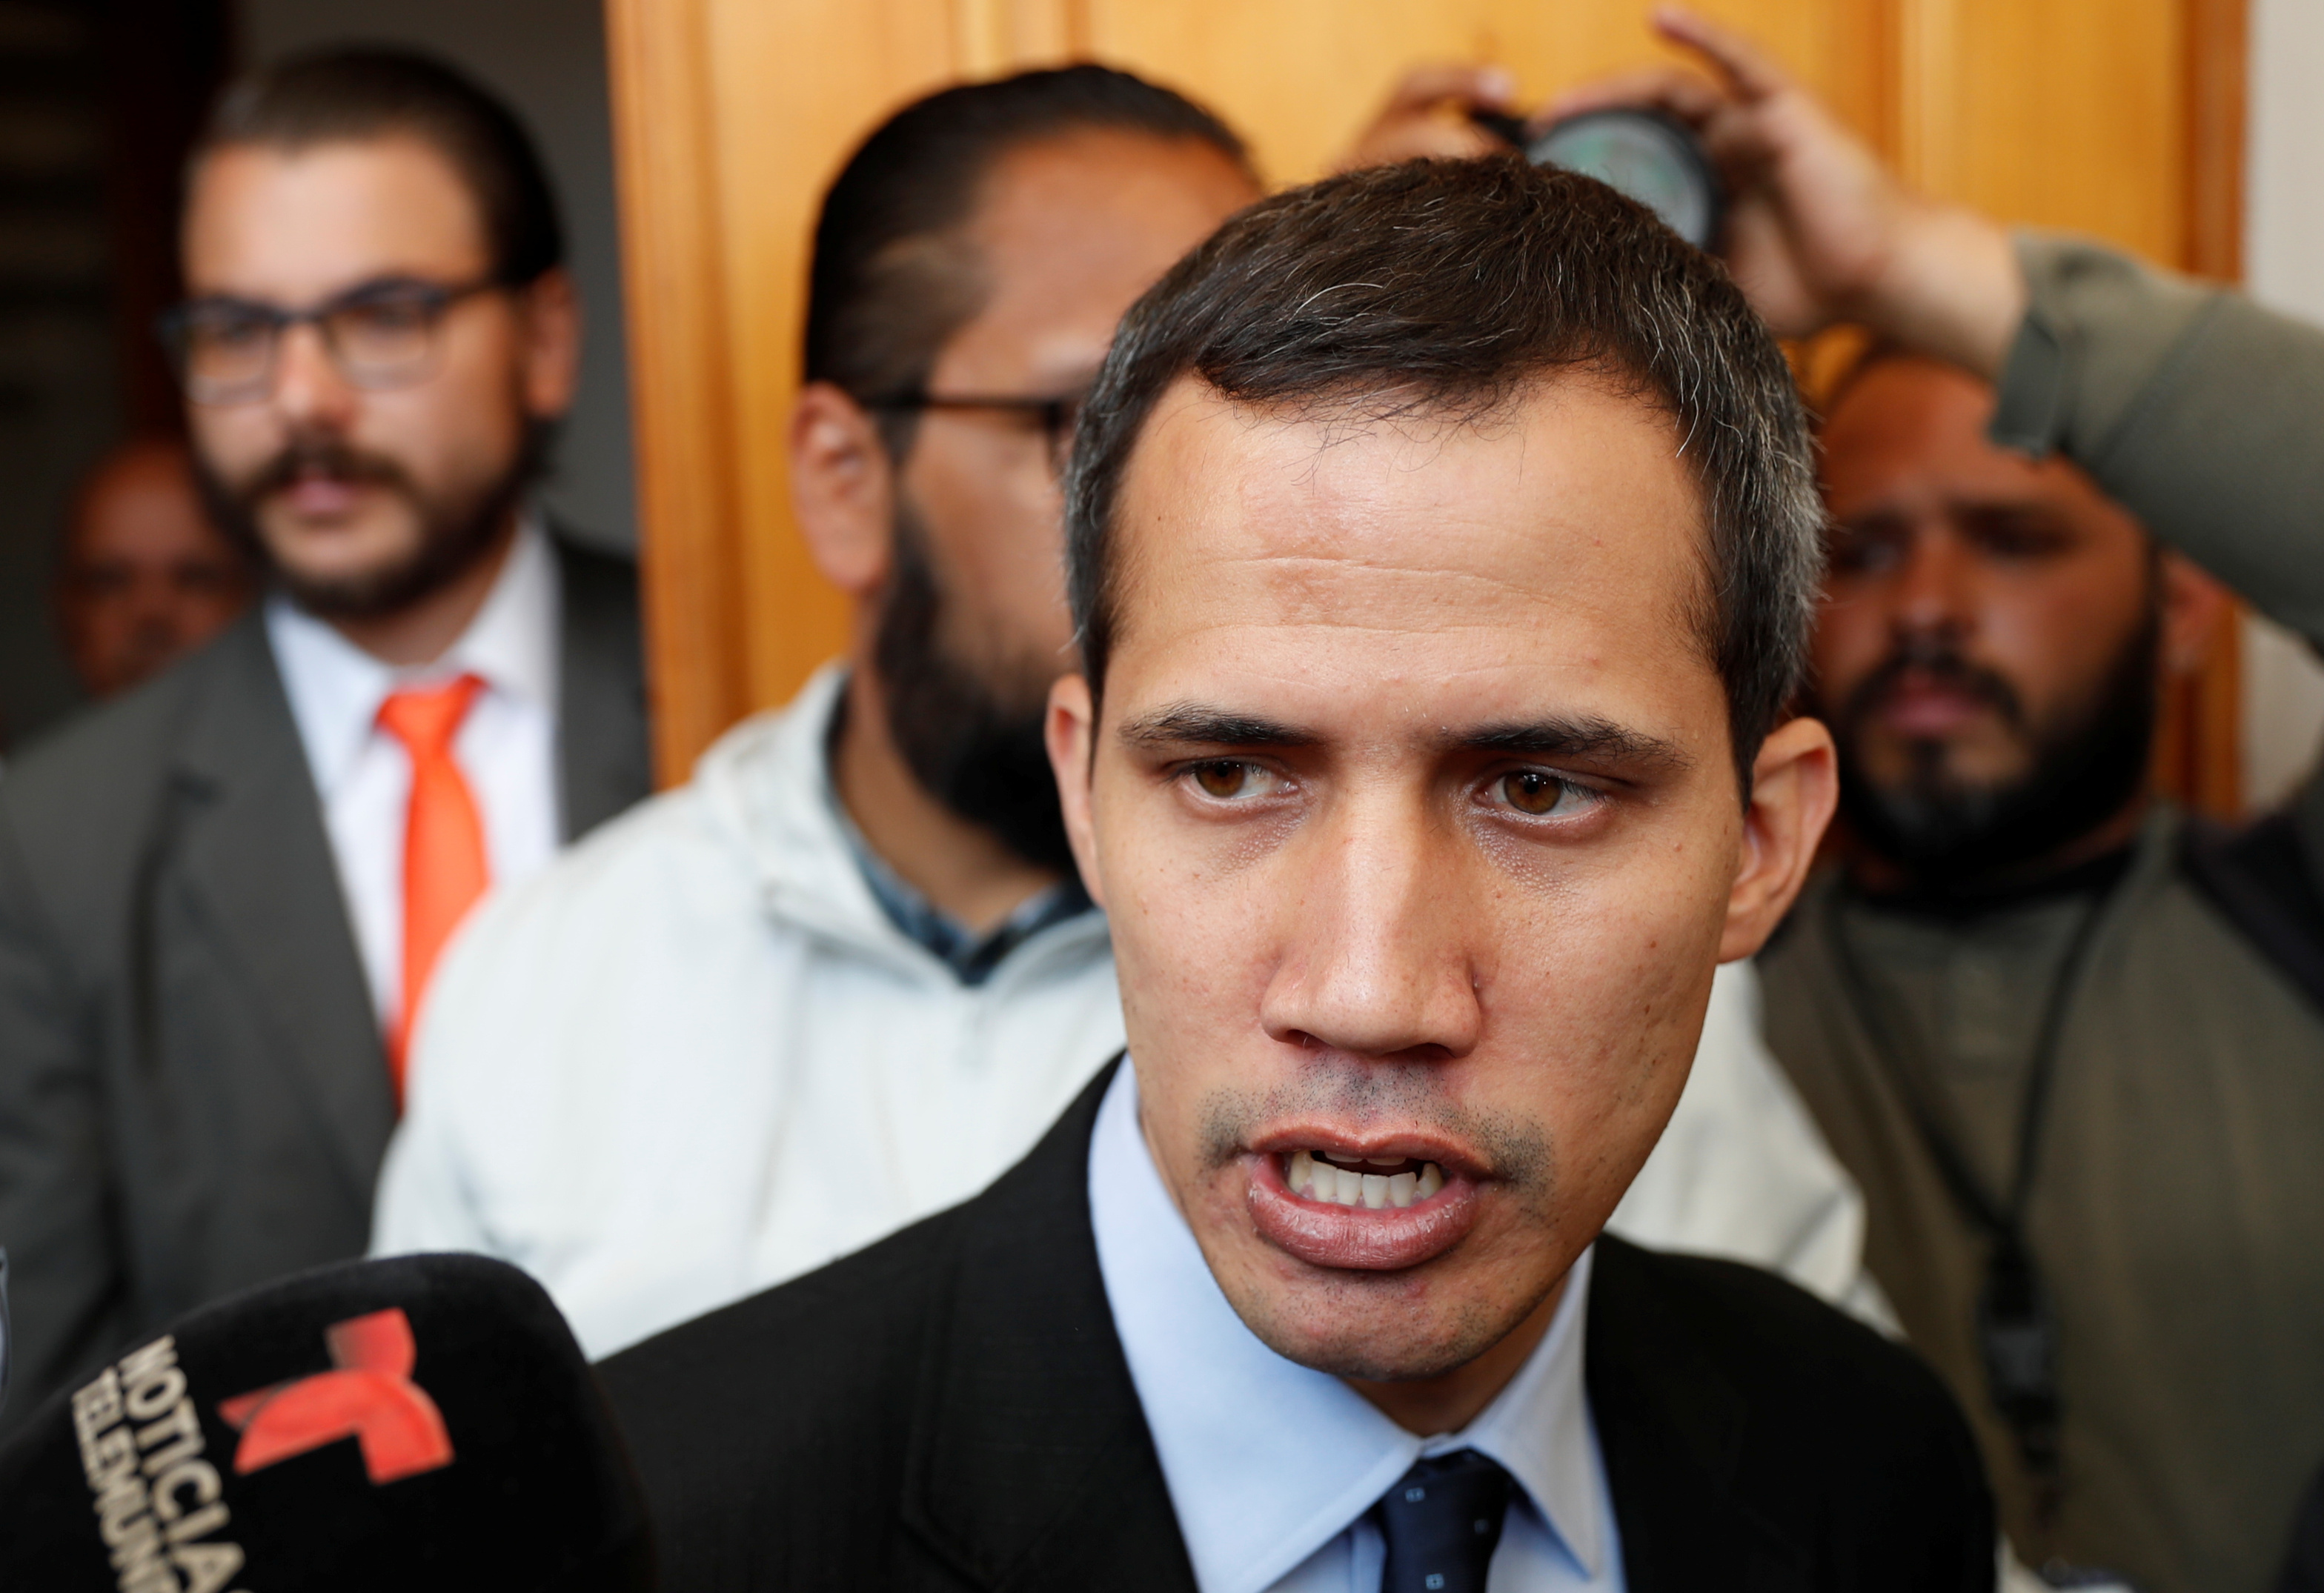 Venezuelan opposition leader and self-proclaimed interim president Juan Guaido talks to the media before a session of the Venezuela’s National Assembly in Caracas, Venezuela January 29, 2019. REUTERS/Carlos Garcia Rawlins